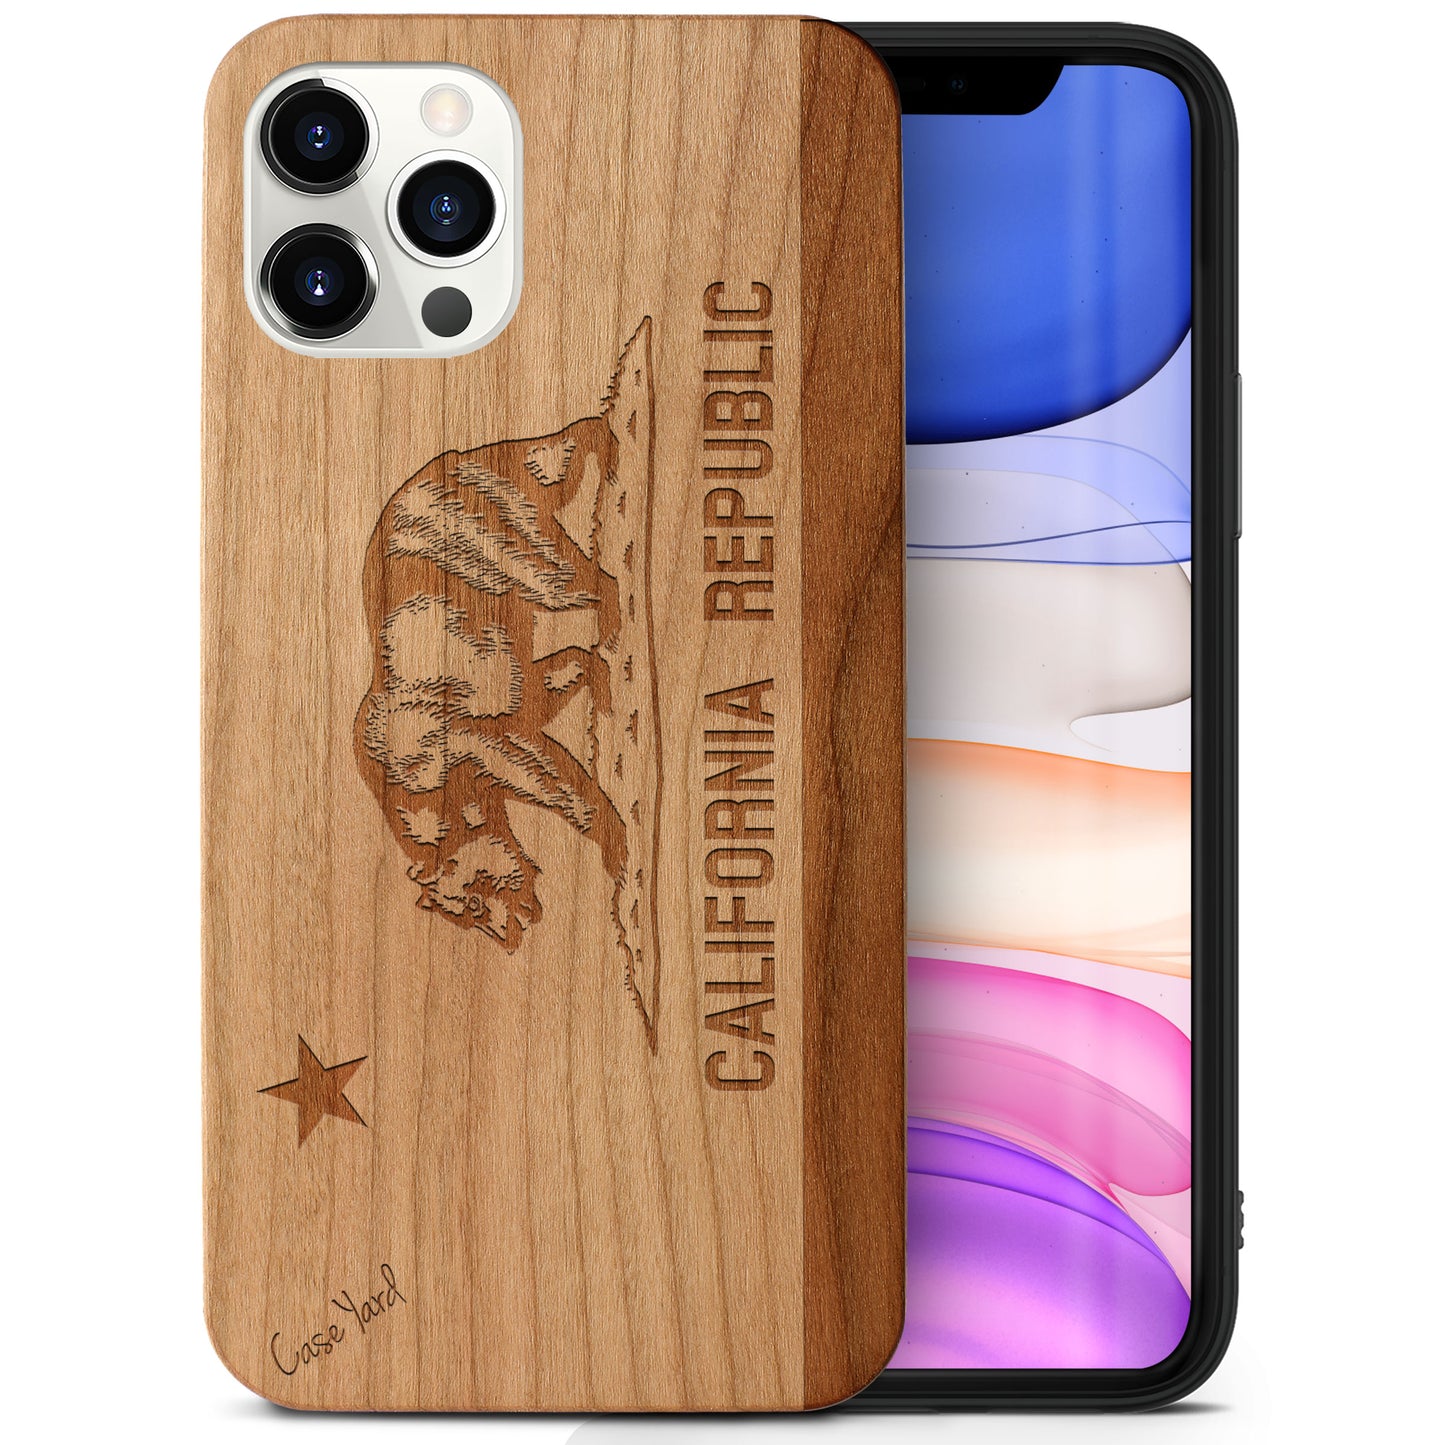 Wooden Cell Phone Case Cover, Laser Engraved case for iPhone & Samsung phone California Flag Design